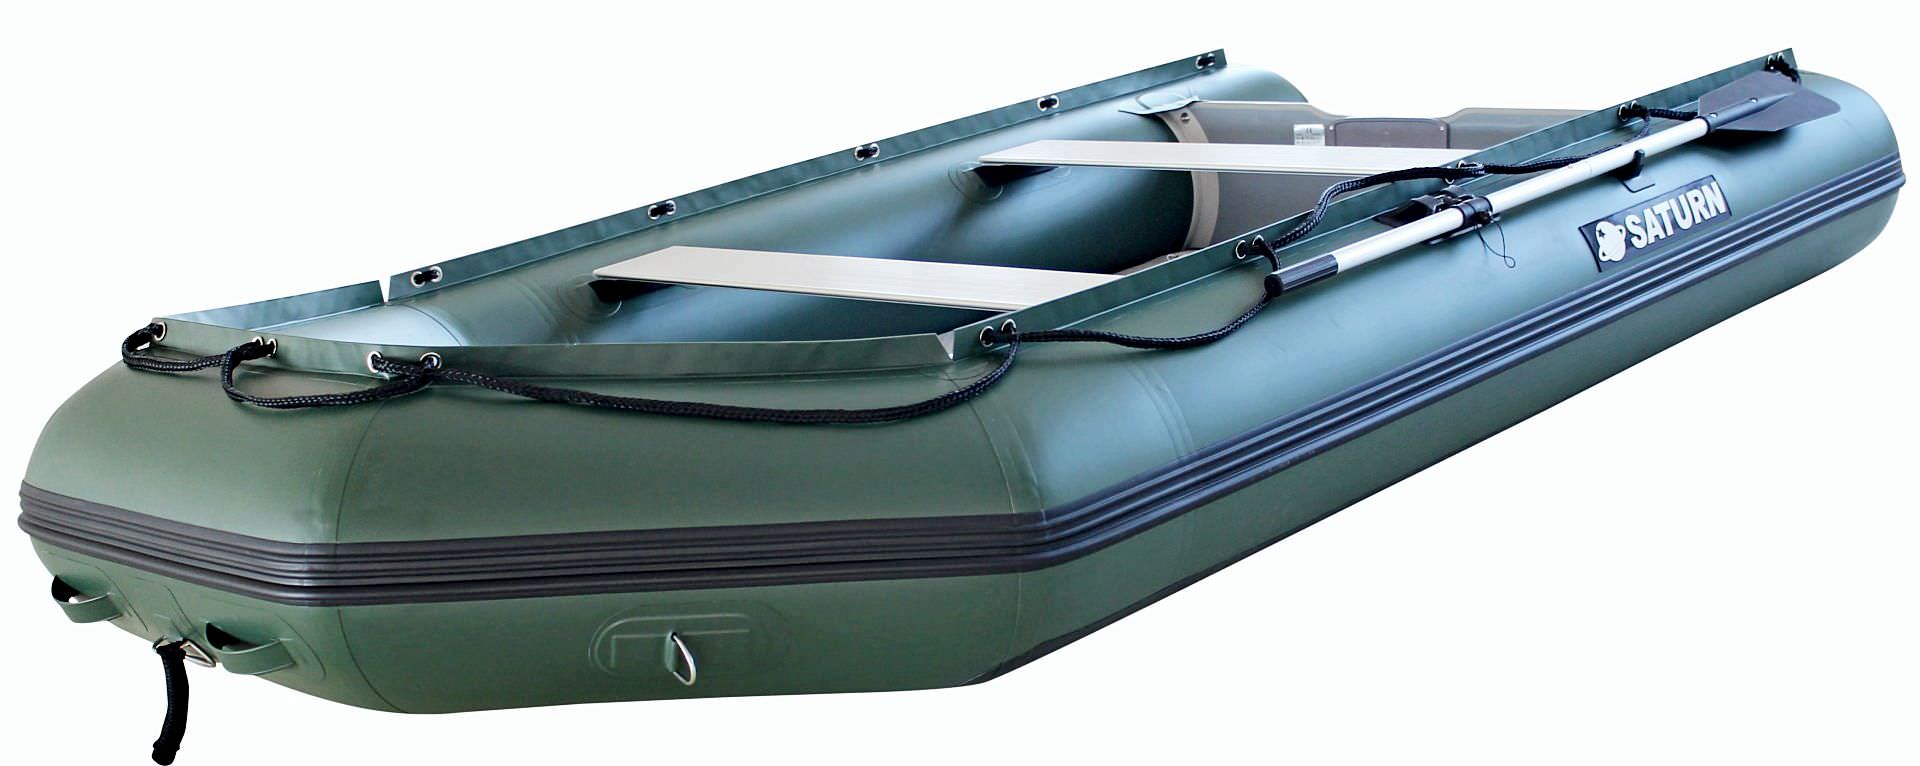 https://www.boatstogo.com/images/detailed/10/Saturn-Inflatable-Boat-SD330W__4_.JPG